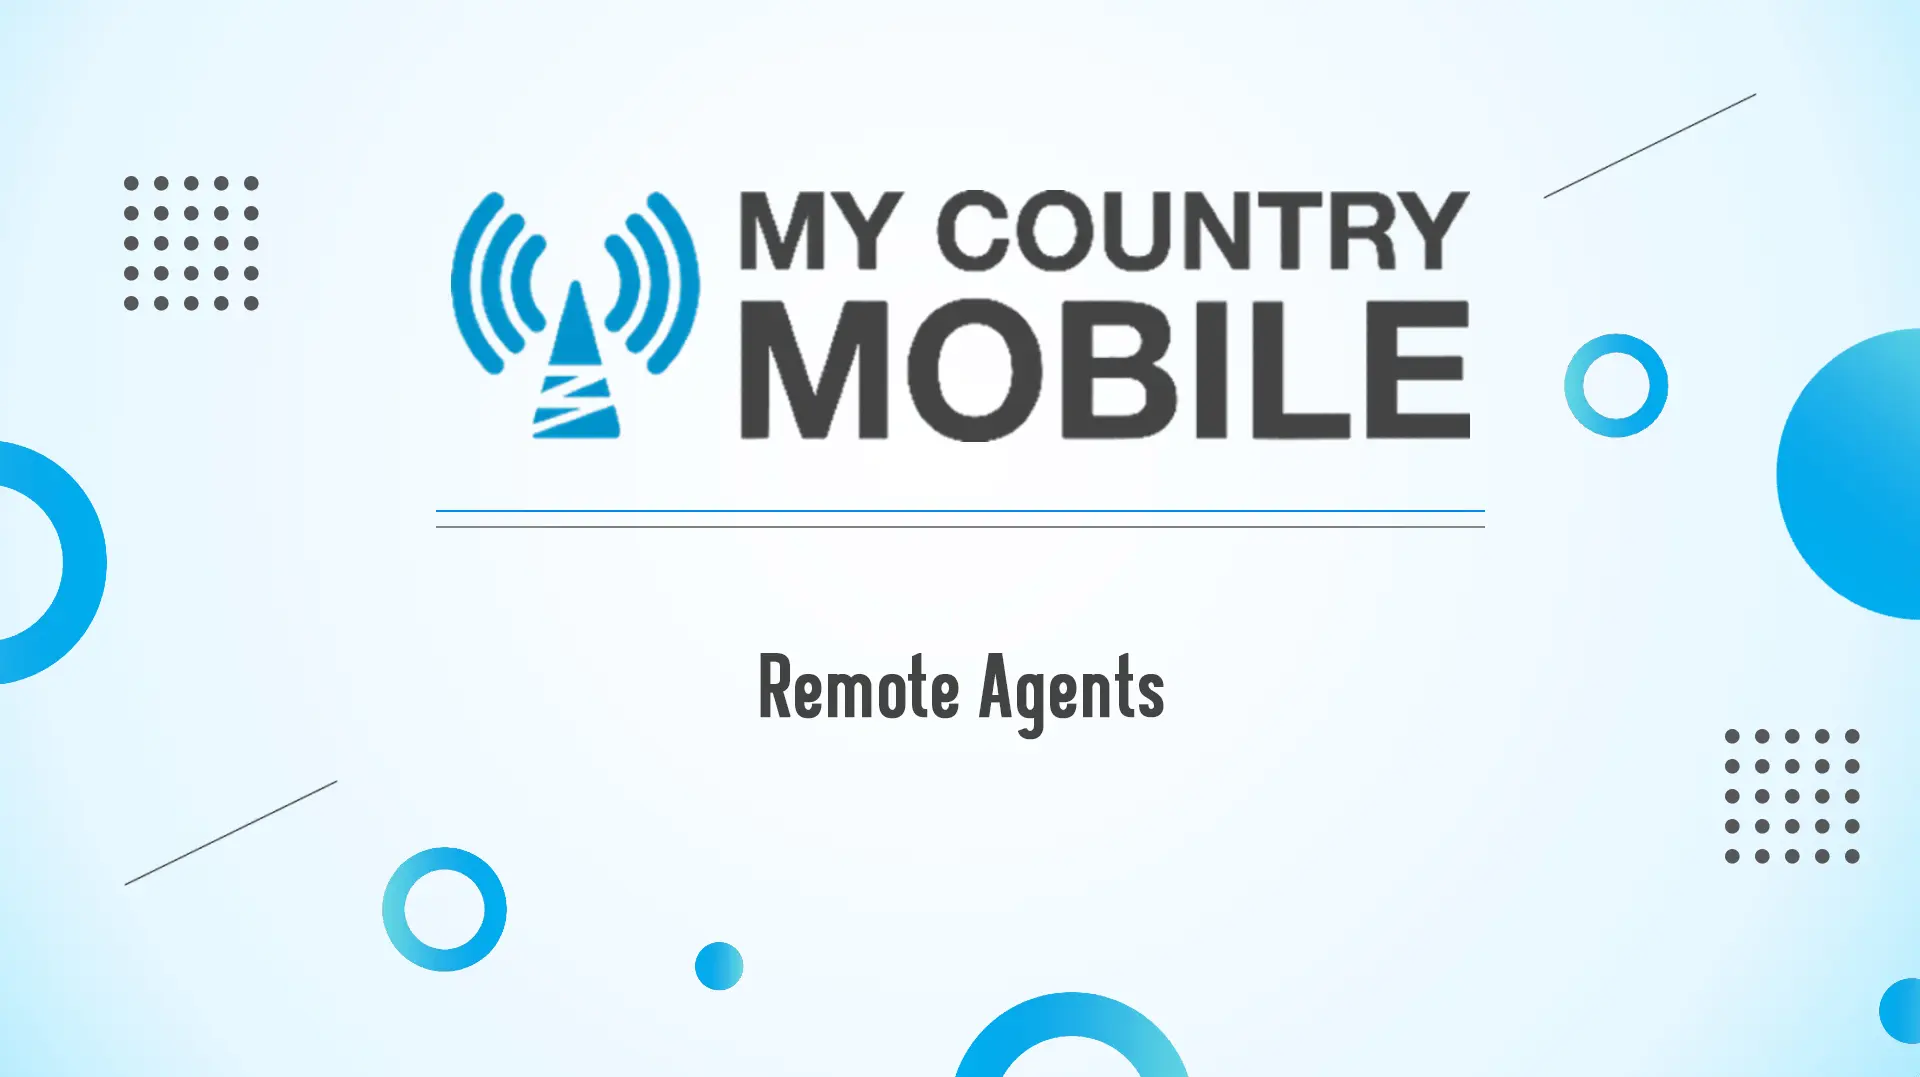 Remote Agents